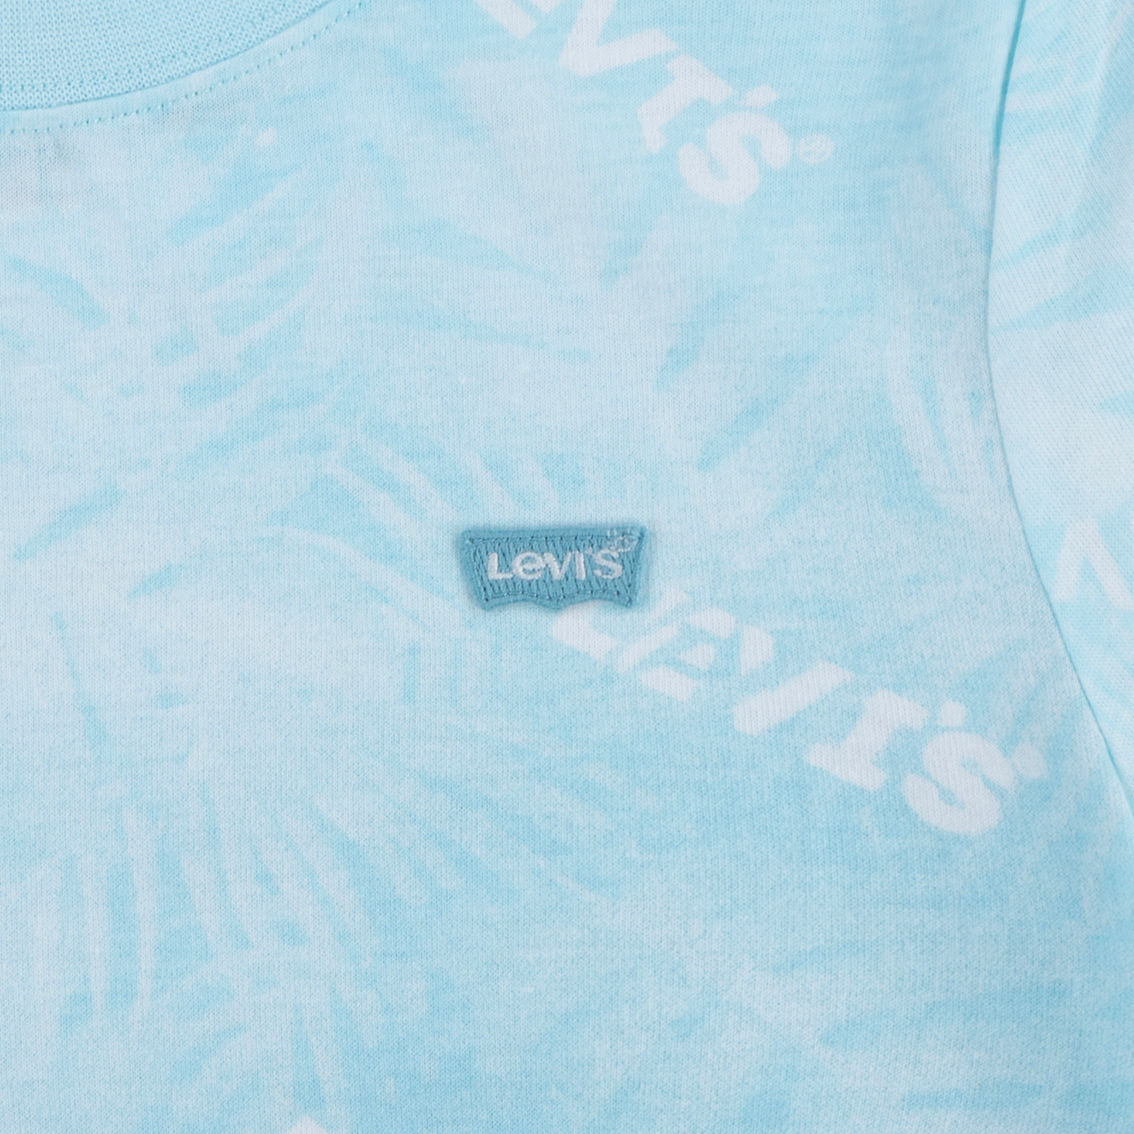 Levi's Little Boys Barely There Palm Tee - Image 3 of 4